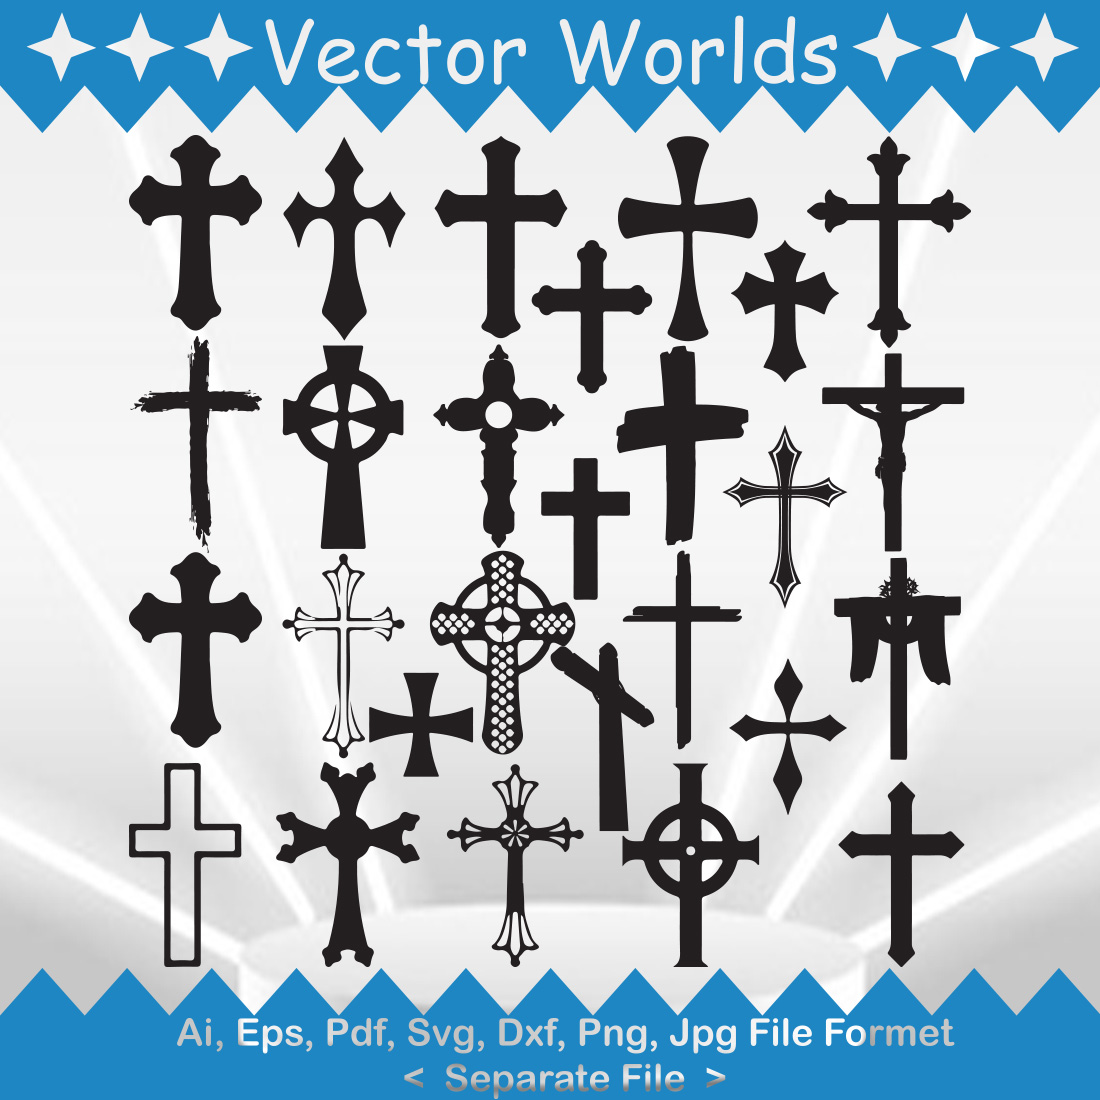 A selection of adorable silhouette images of crosses